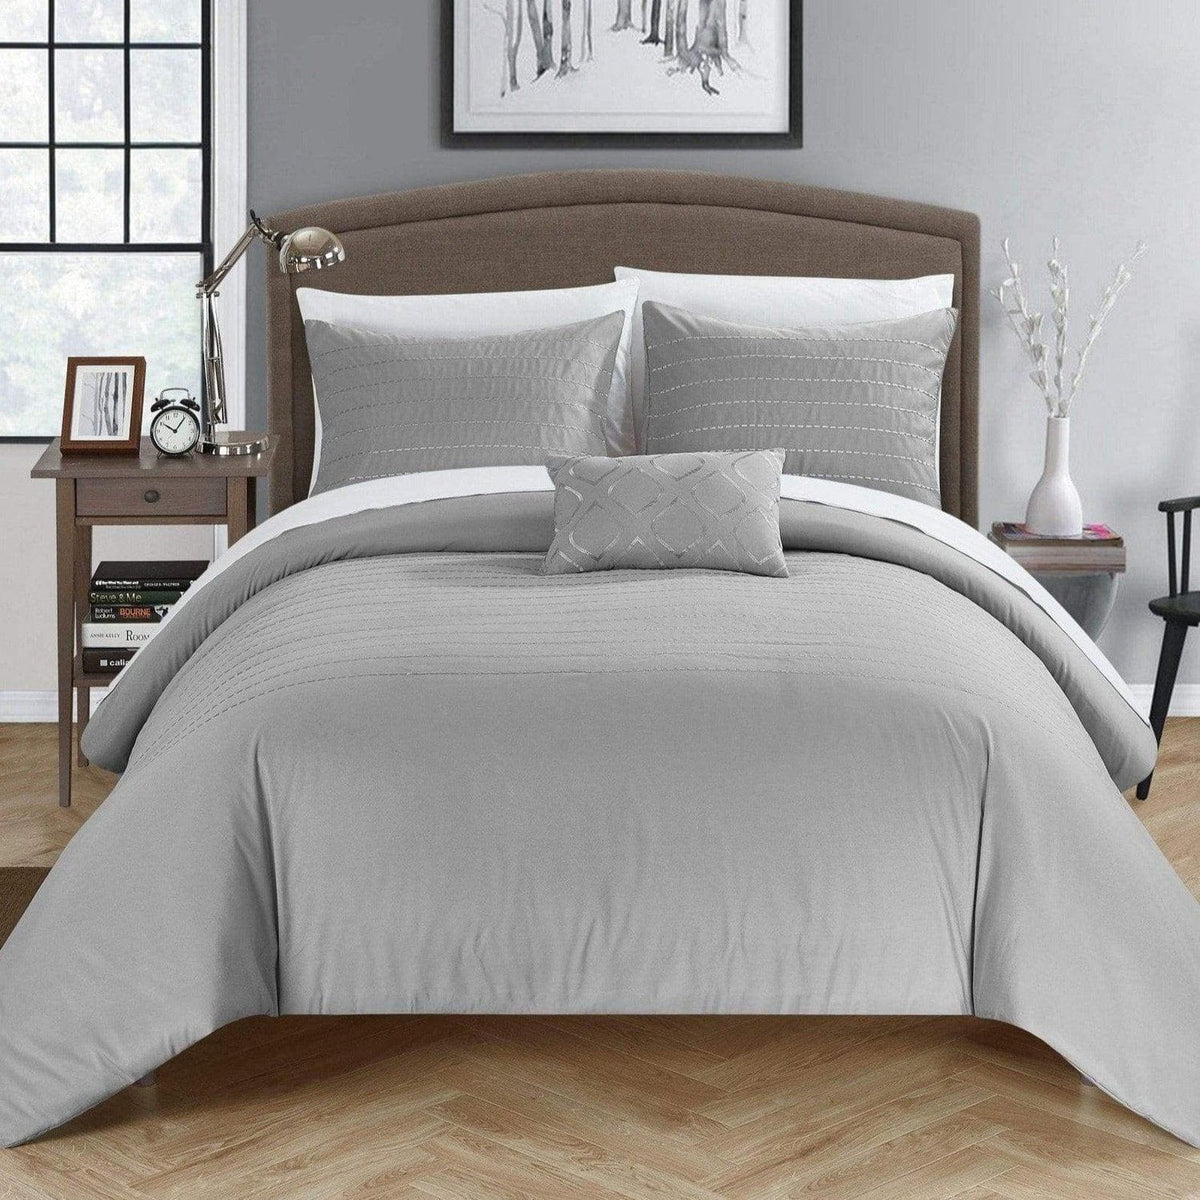 Chic Home Bea 8 Piece Embroidered Duvet Cover Set Grey